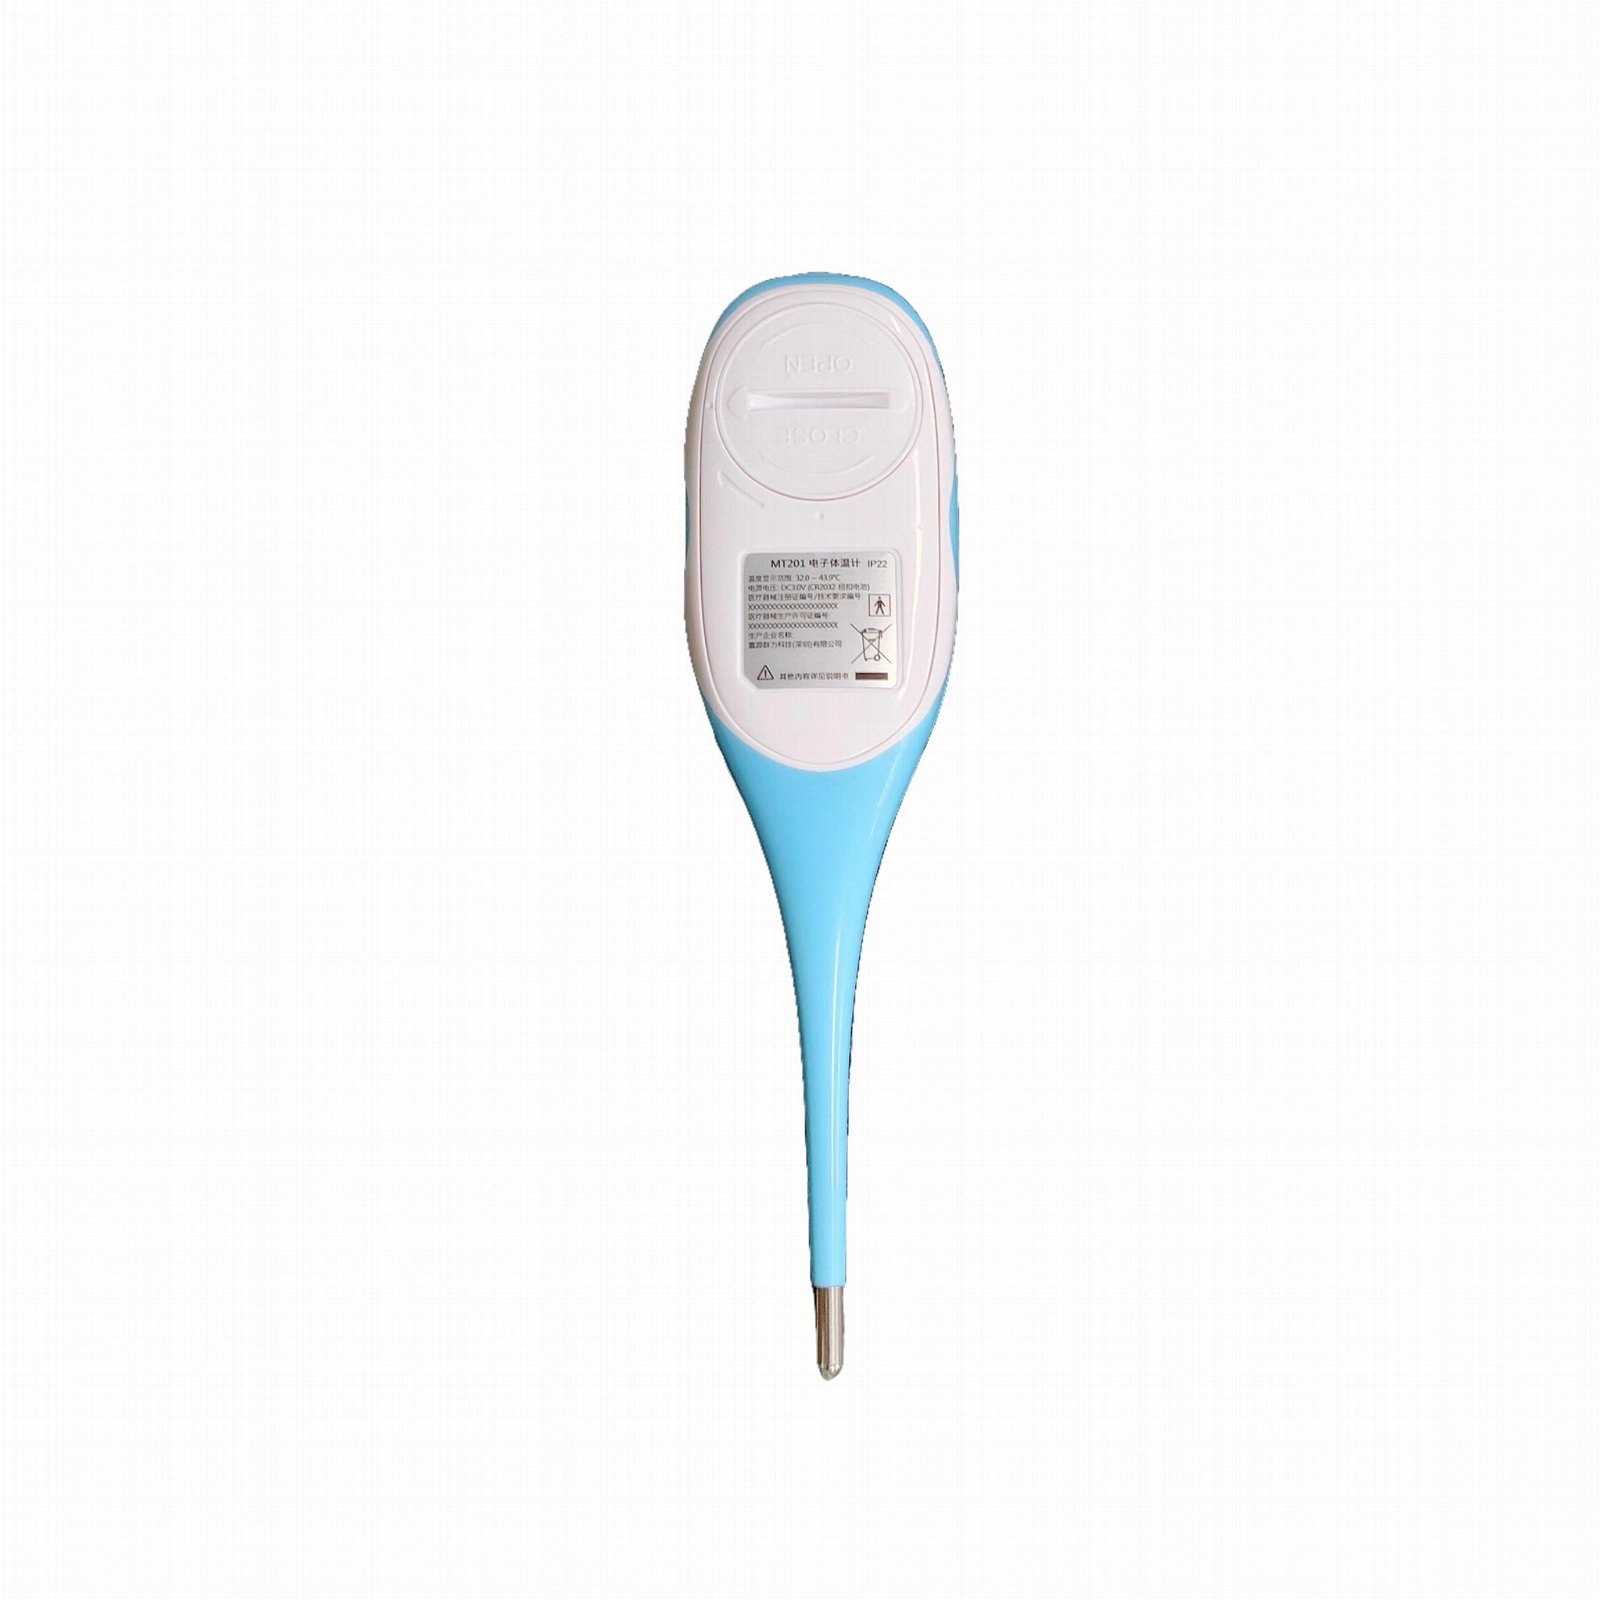 MT201  8 second FEVER GLOW Digital thermometer 2